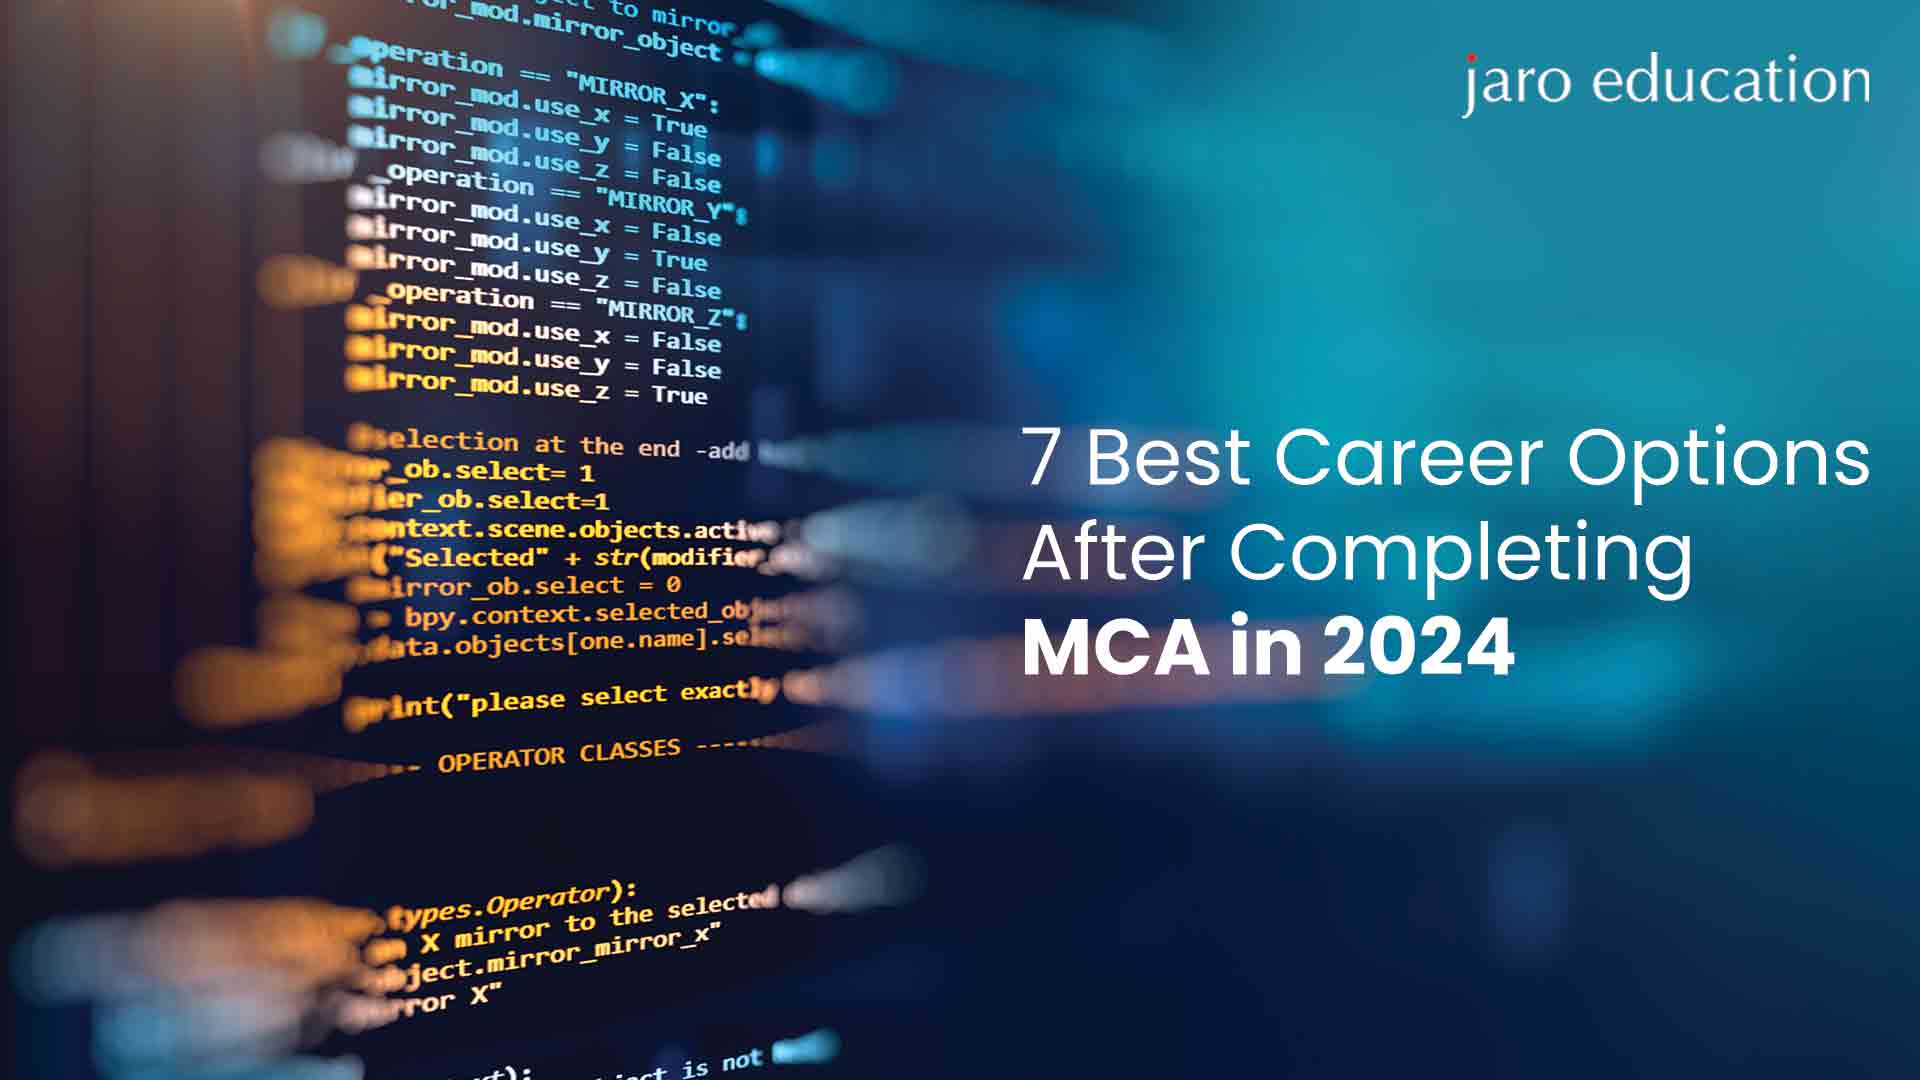 7-Best-Career-Options-After-Completing-MCA-in-2024